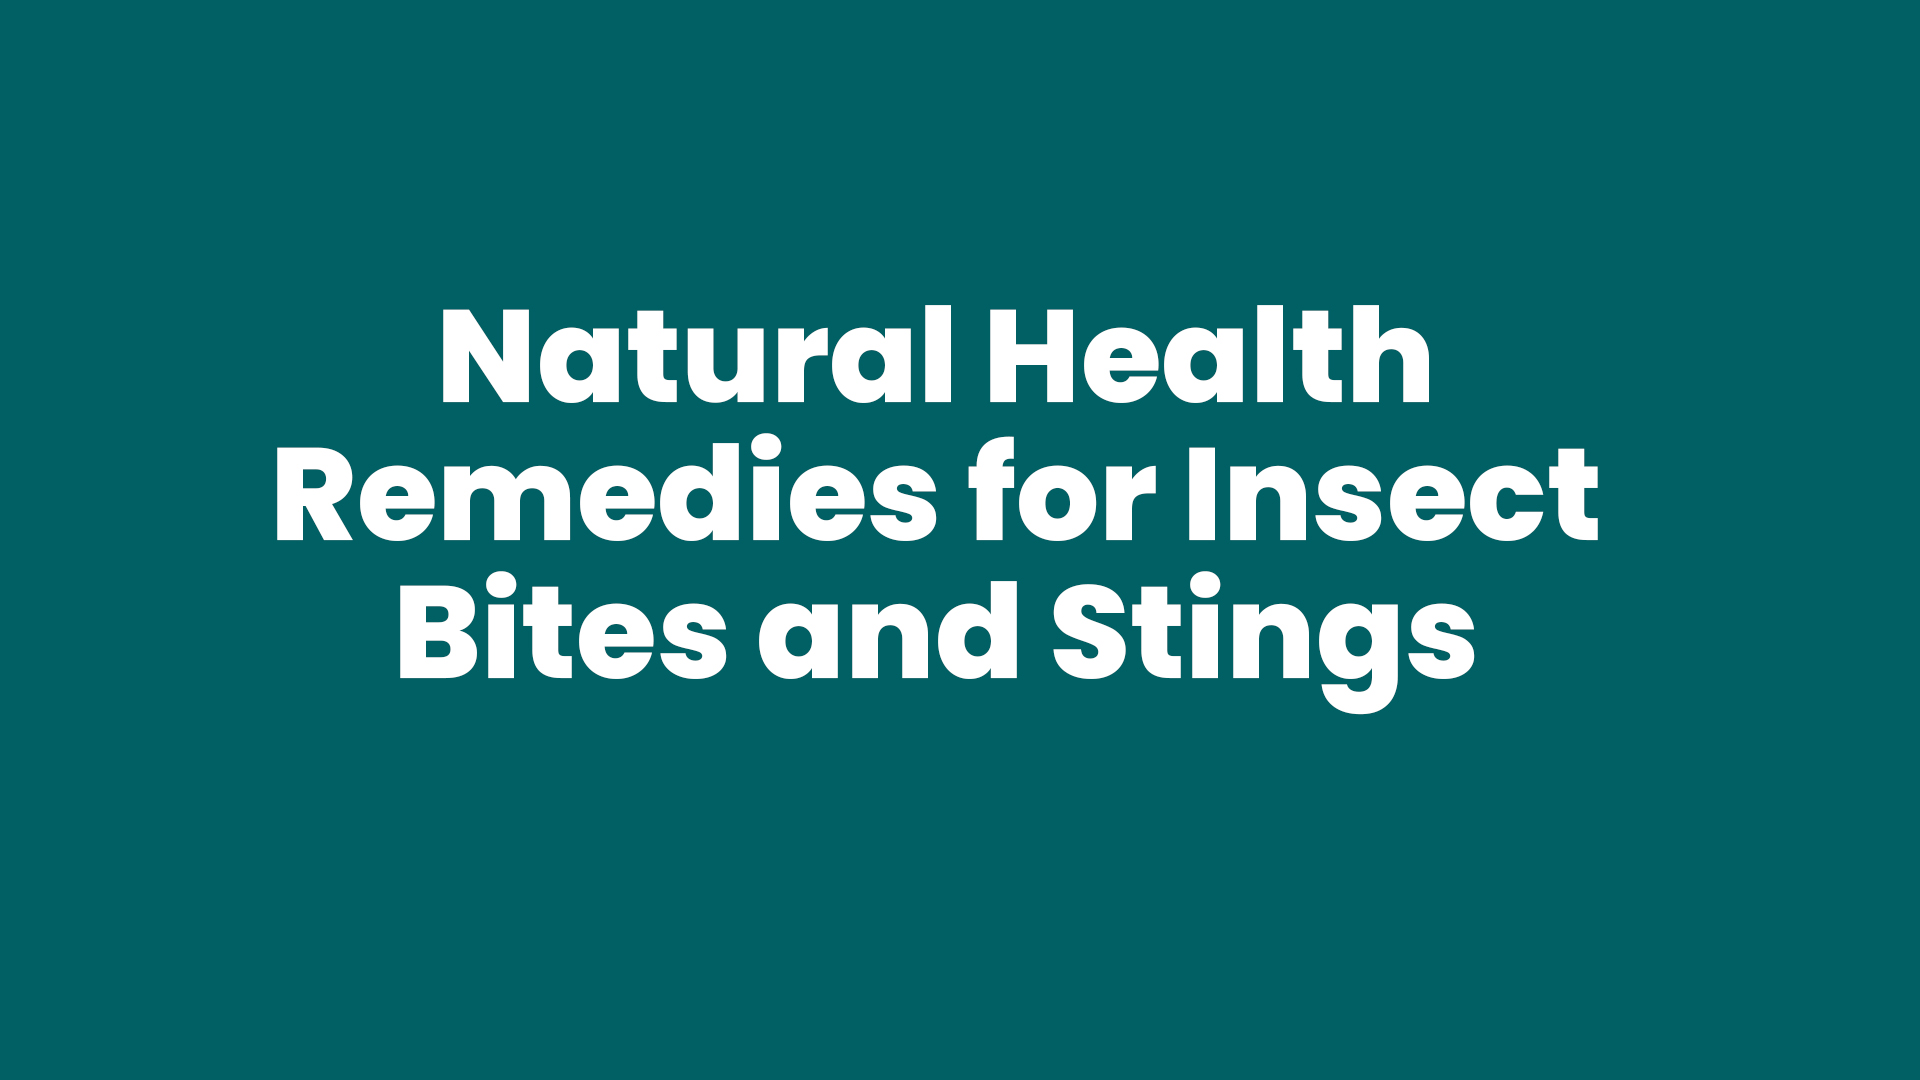 Natural Health Remedies for Insect Bites and Stings